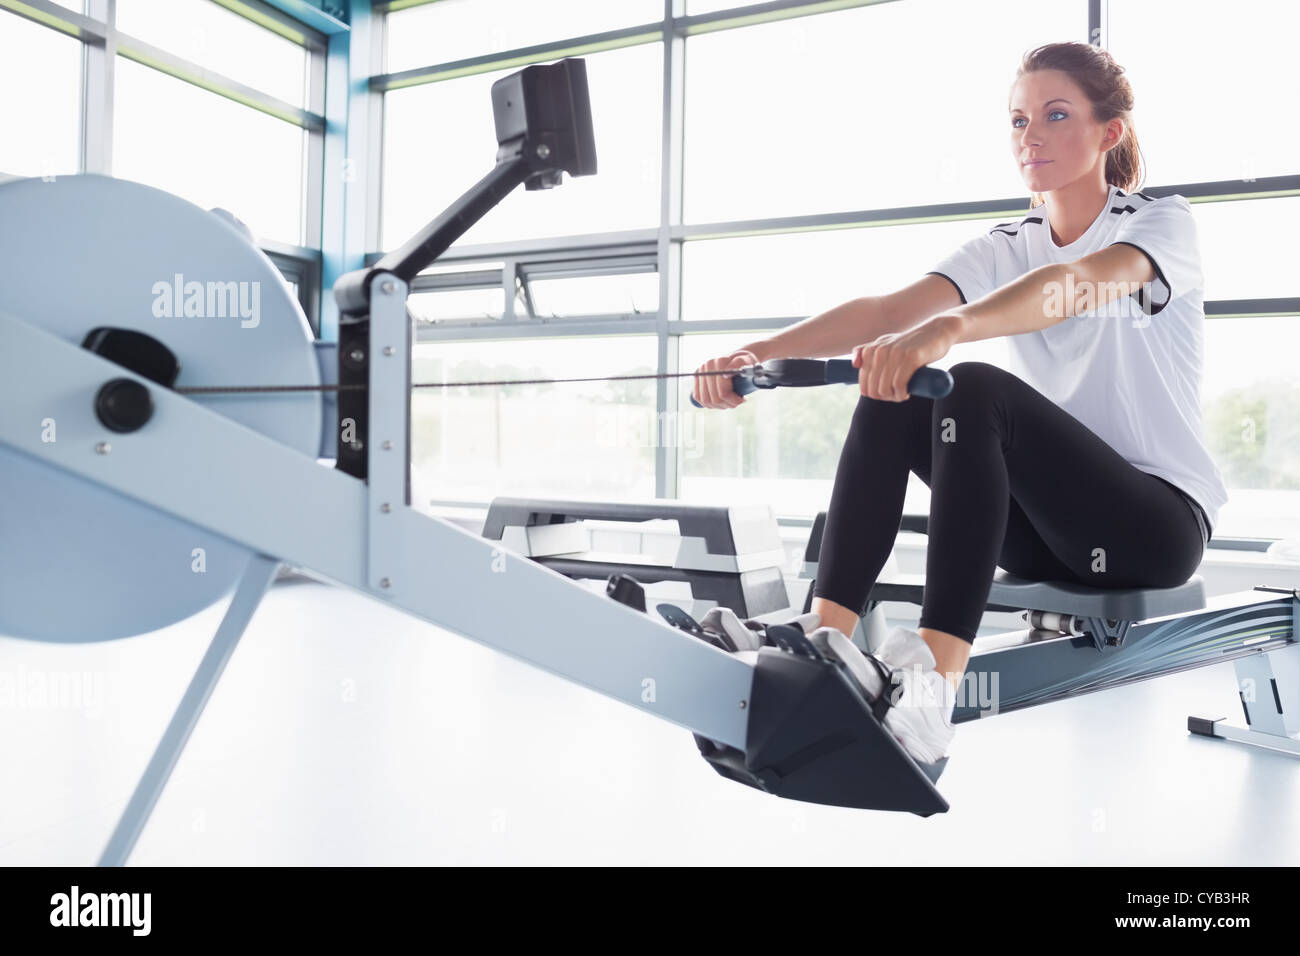 Concentrating  woman training on row machine Stock Photo